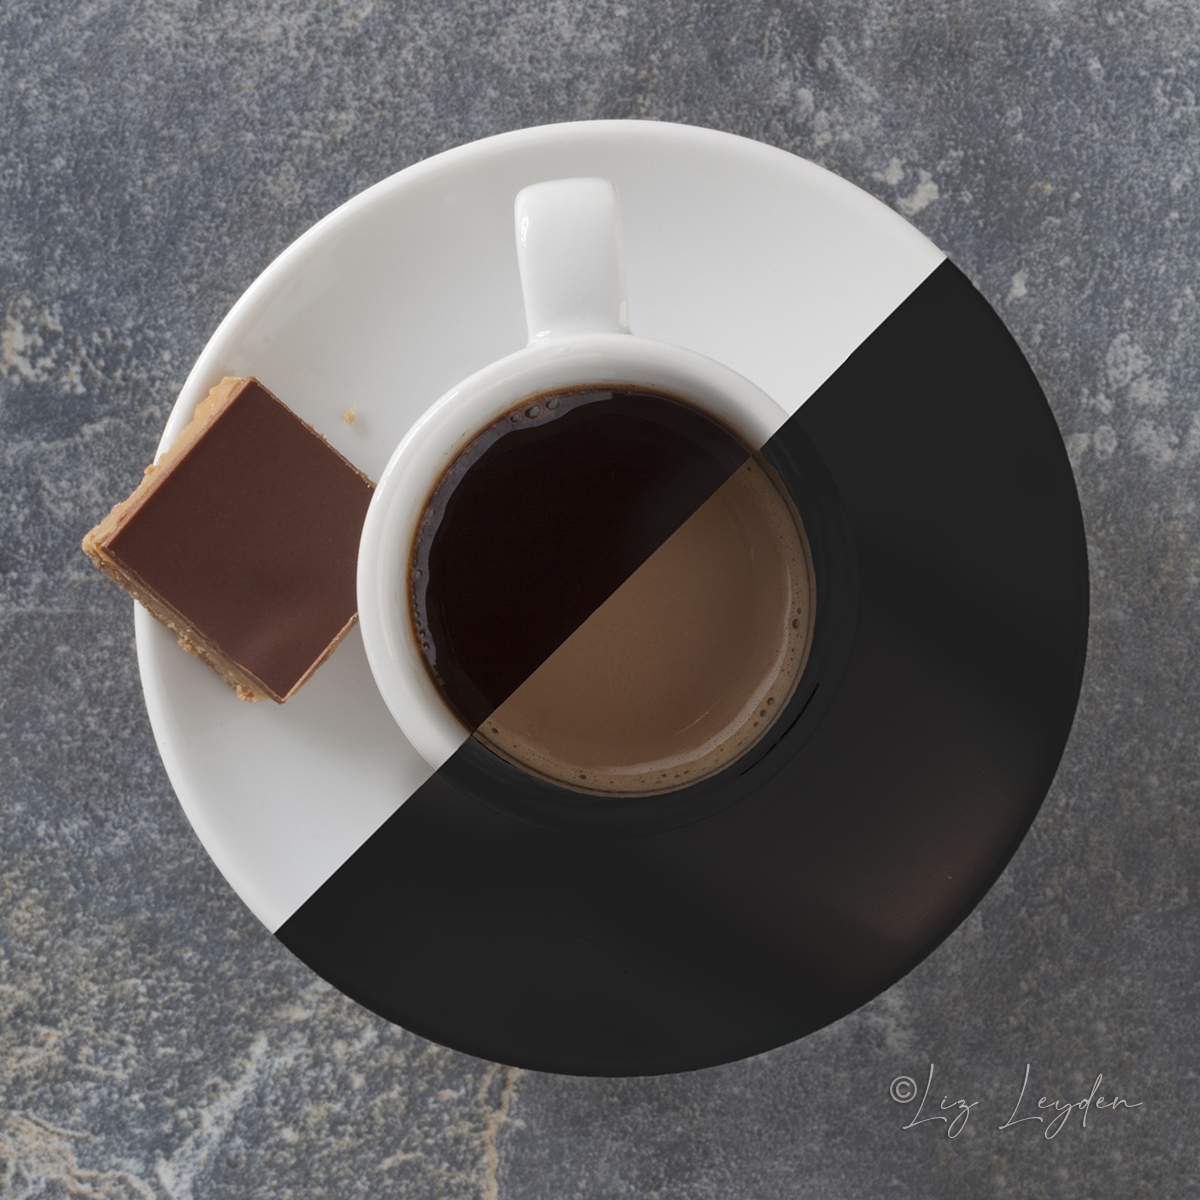 Altered reality image of coffee